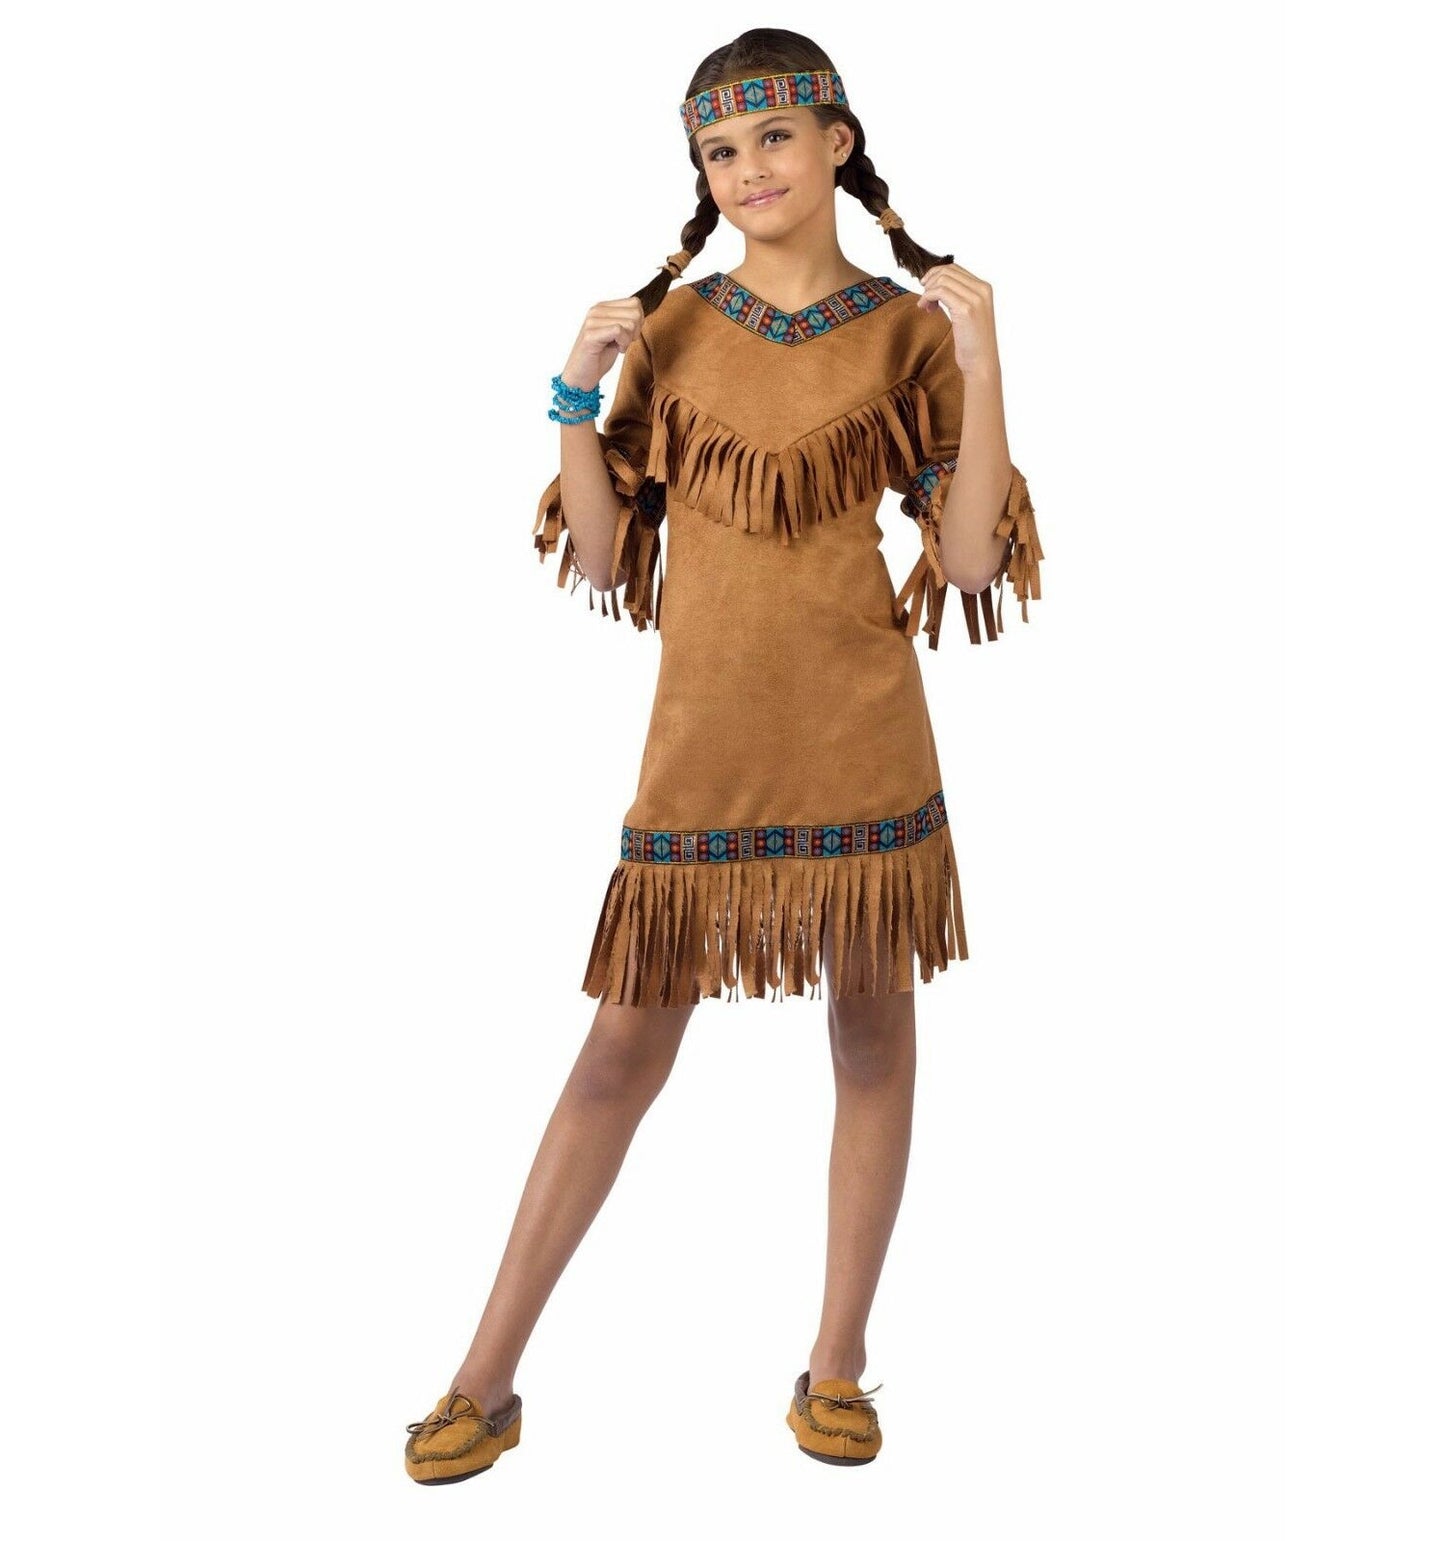 Native American Indian Princess Girl Child Costume Fringed faux suede dress with ribbon trim Headband